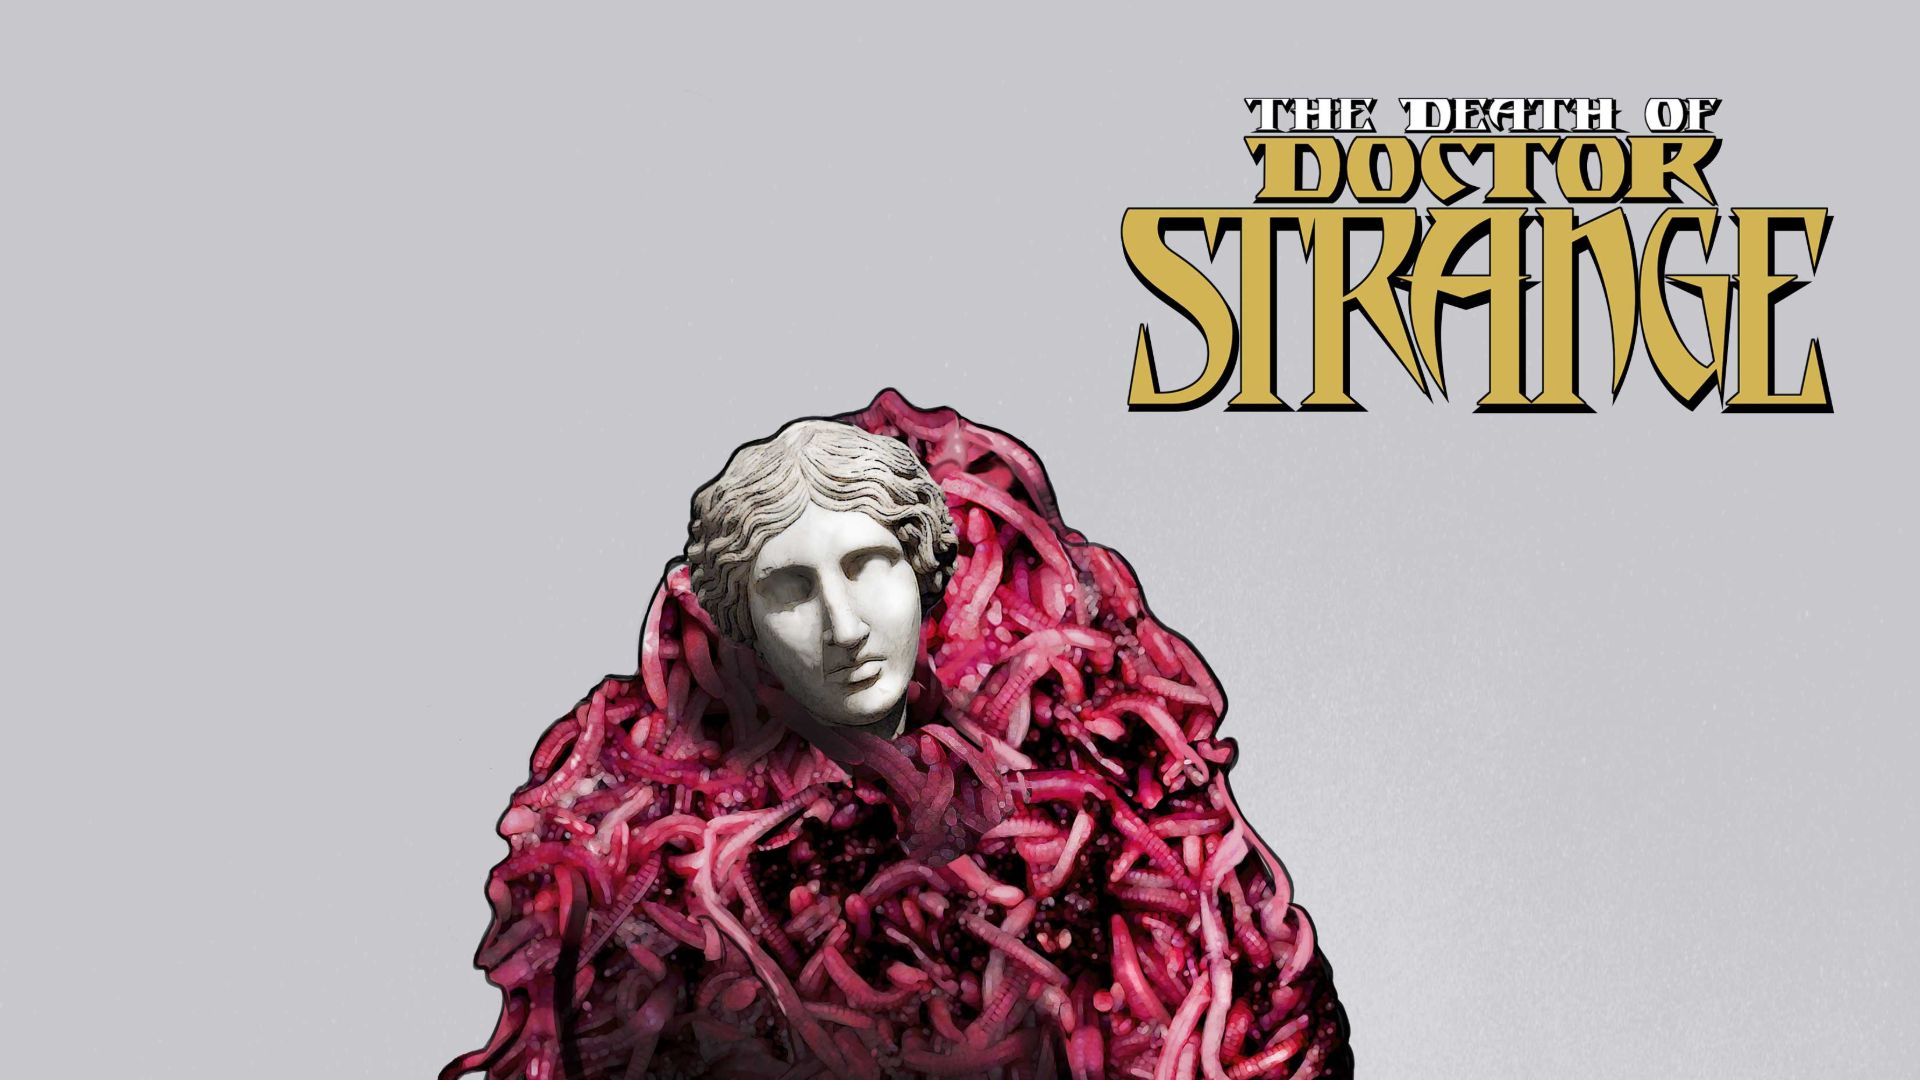 DEATH OF DOCTOR STRANGE miniseries introduces the mother of all